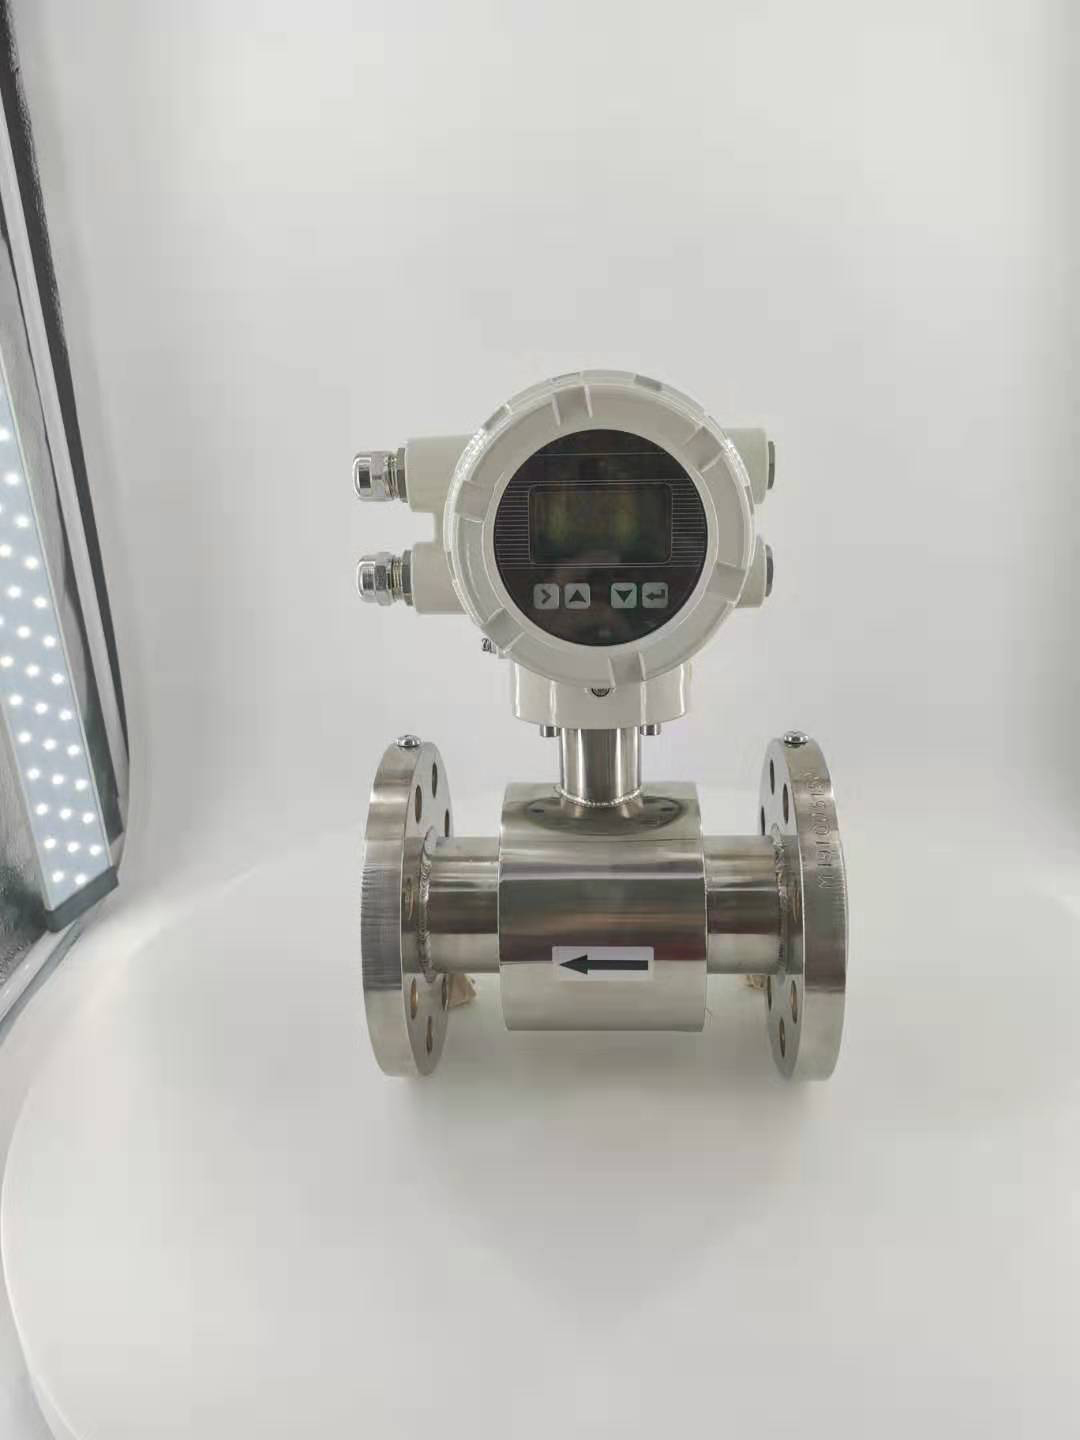 What are the characteristics of electromagnetic flowmeters?